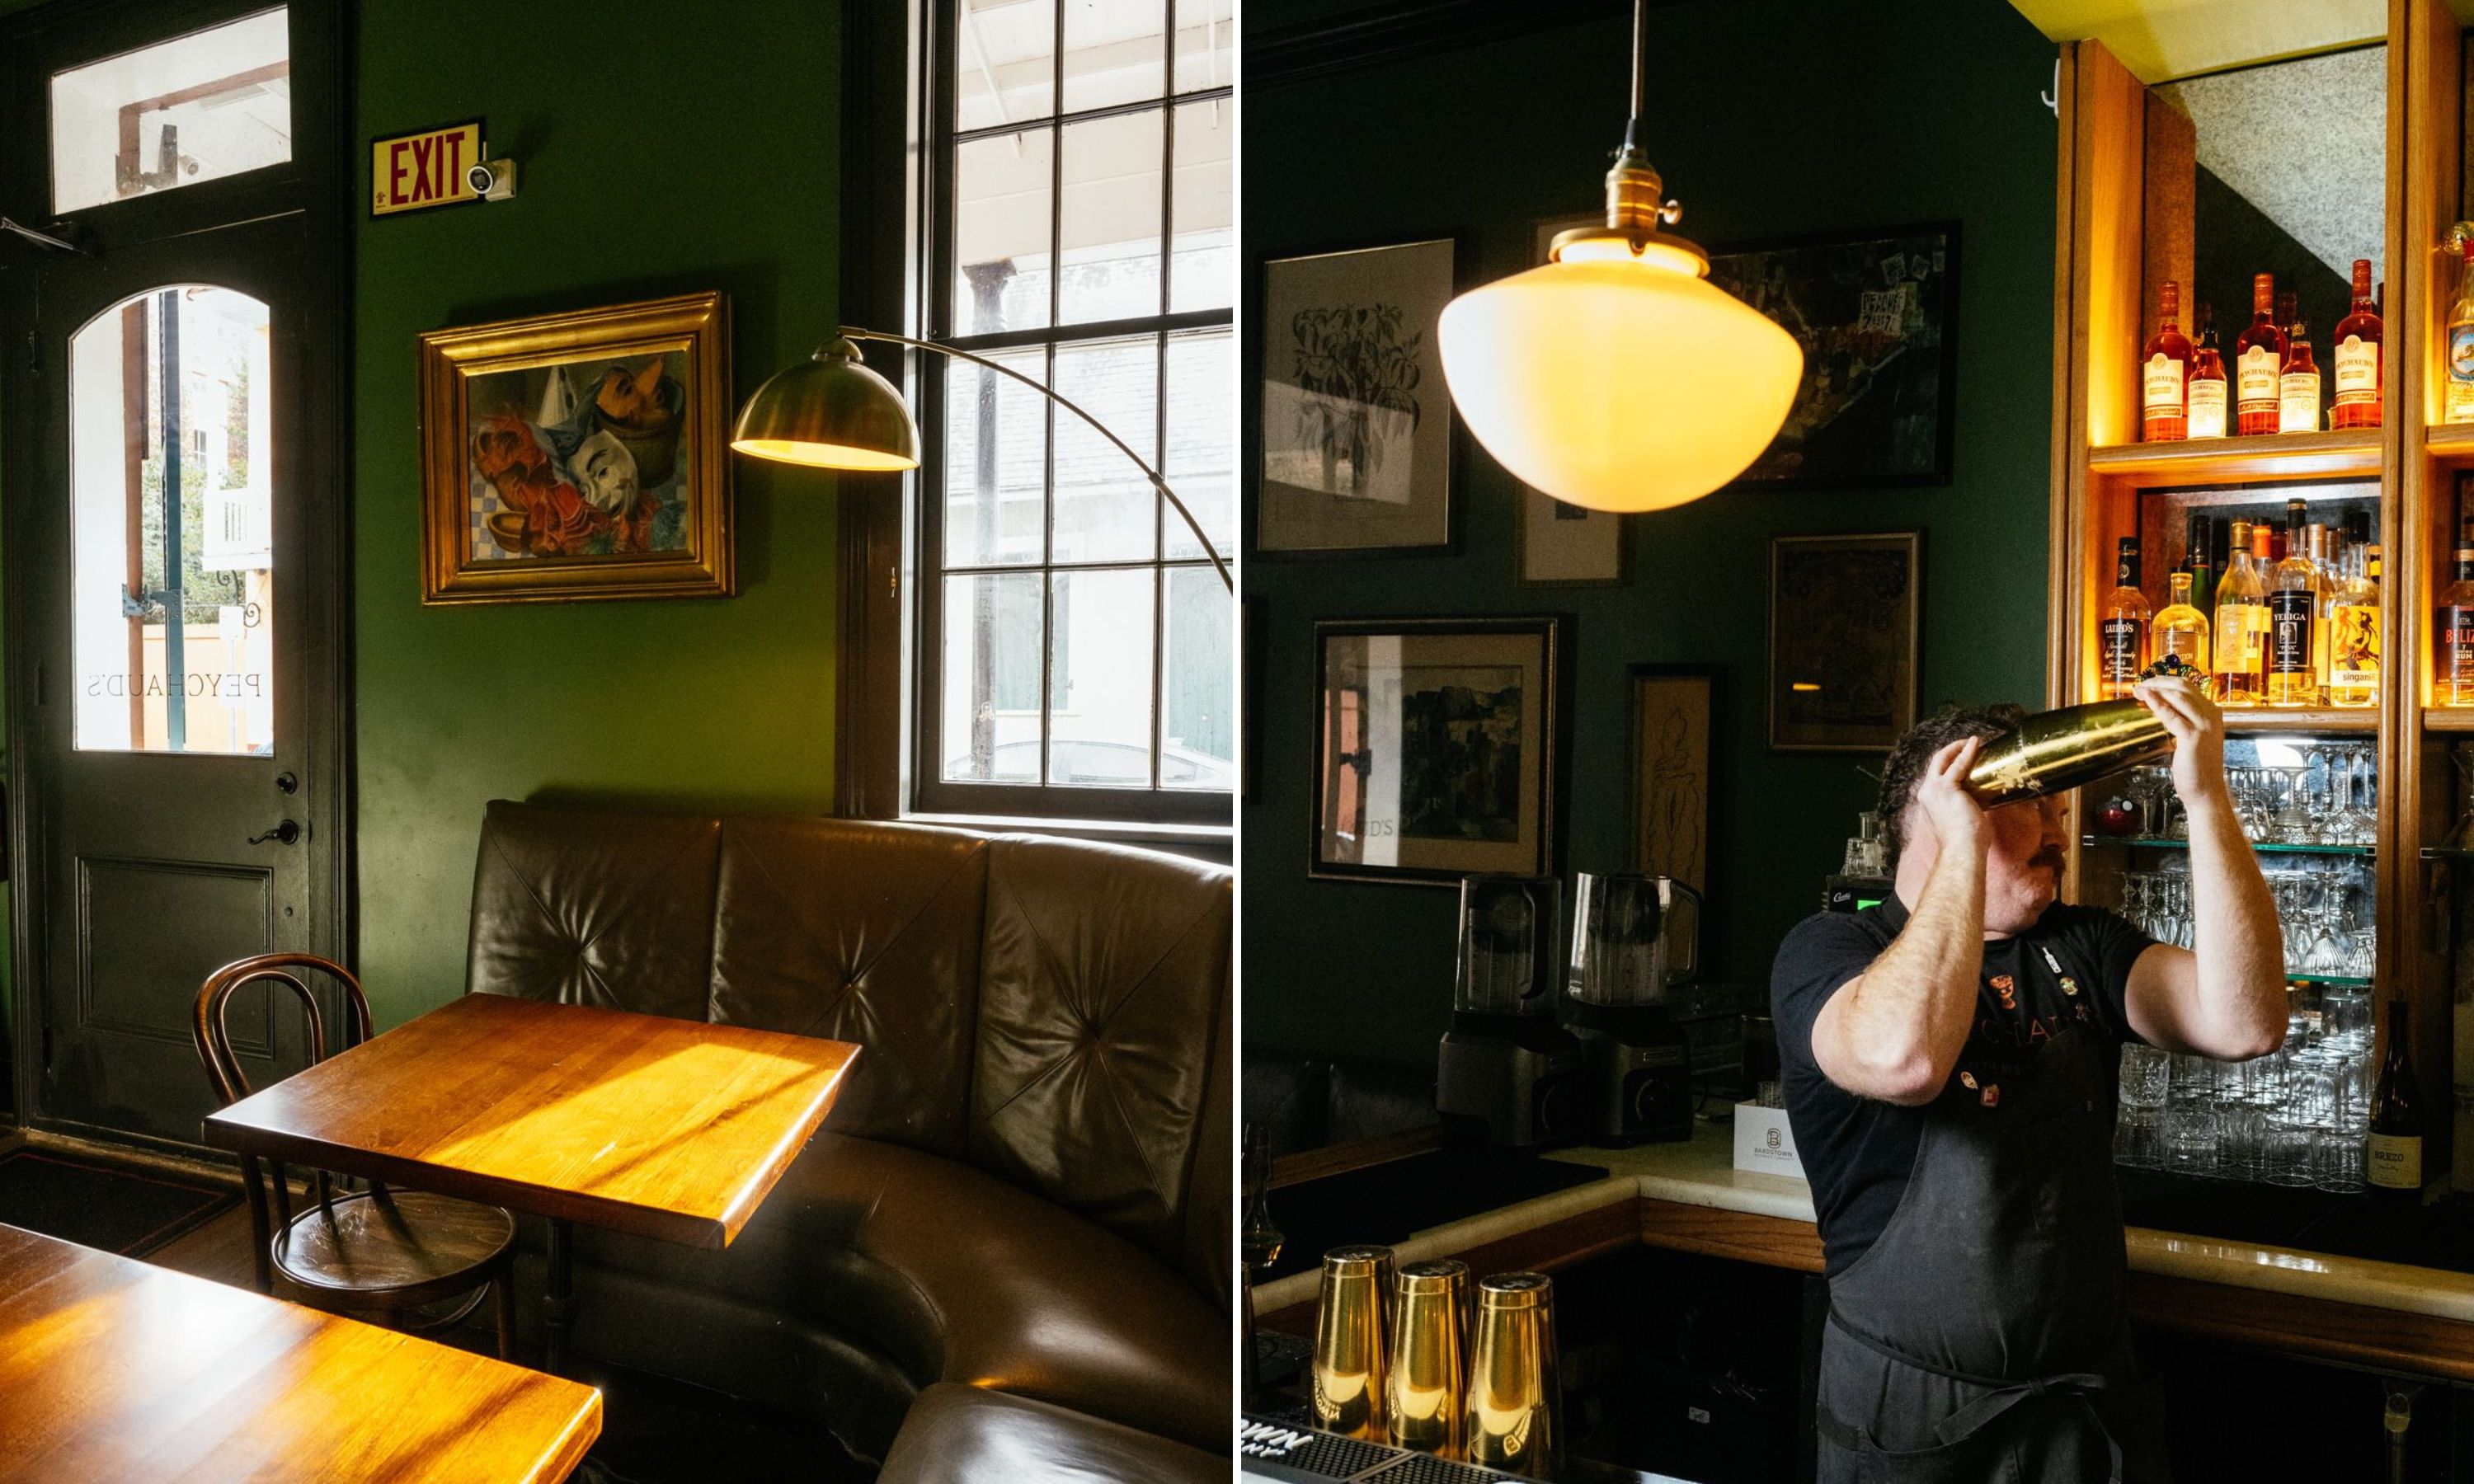 A collage of two images: A leather booth in a green bar; a man shakes up a cocktail behind the bar